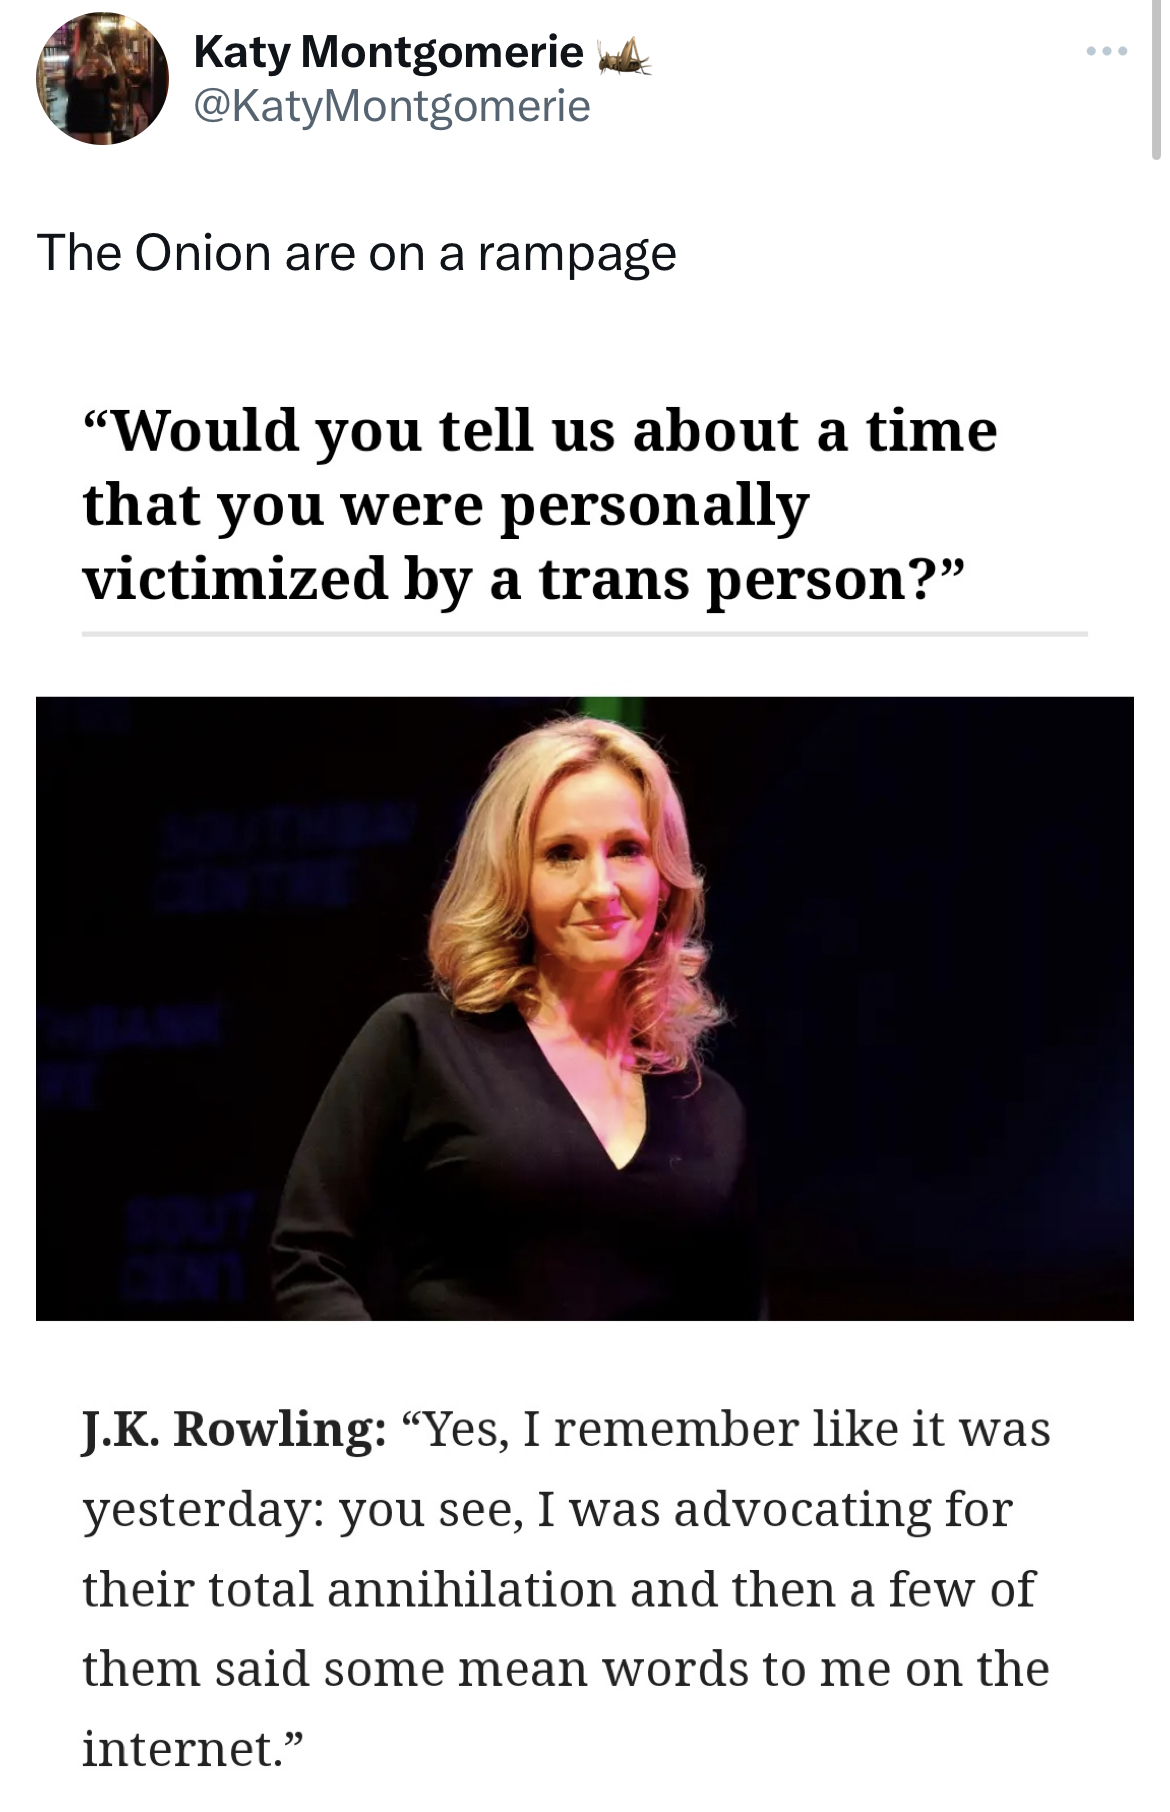 Tweets dunking on celebs - el rancho nuevo - Katy Montgomerie The Onion are on a rampage "Would you tell us about a time that you were personally victimized by a trans person?" J.K. Rowling "Yes, I remember it was yesterday you see, I was advocating for t